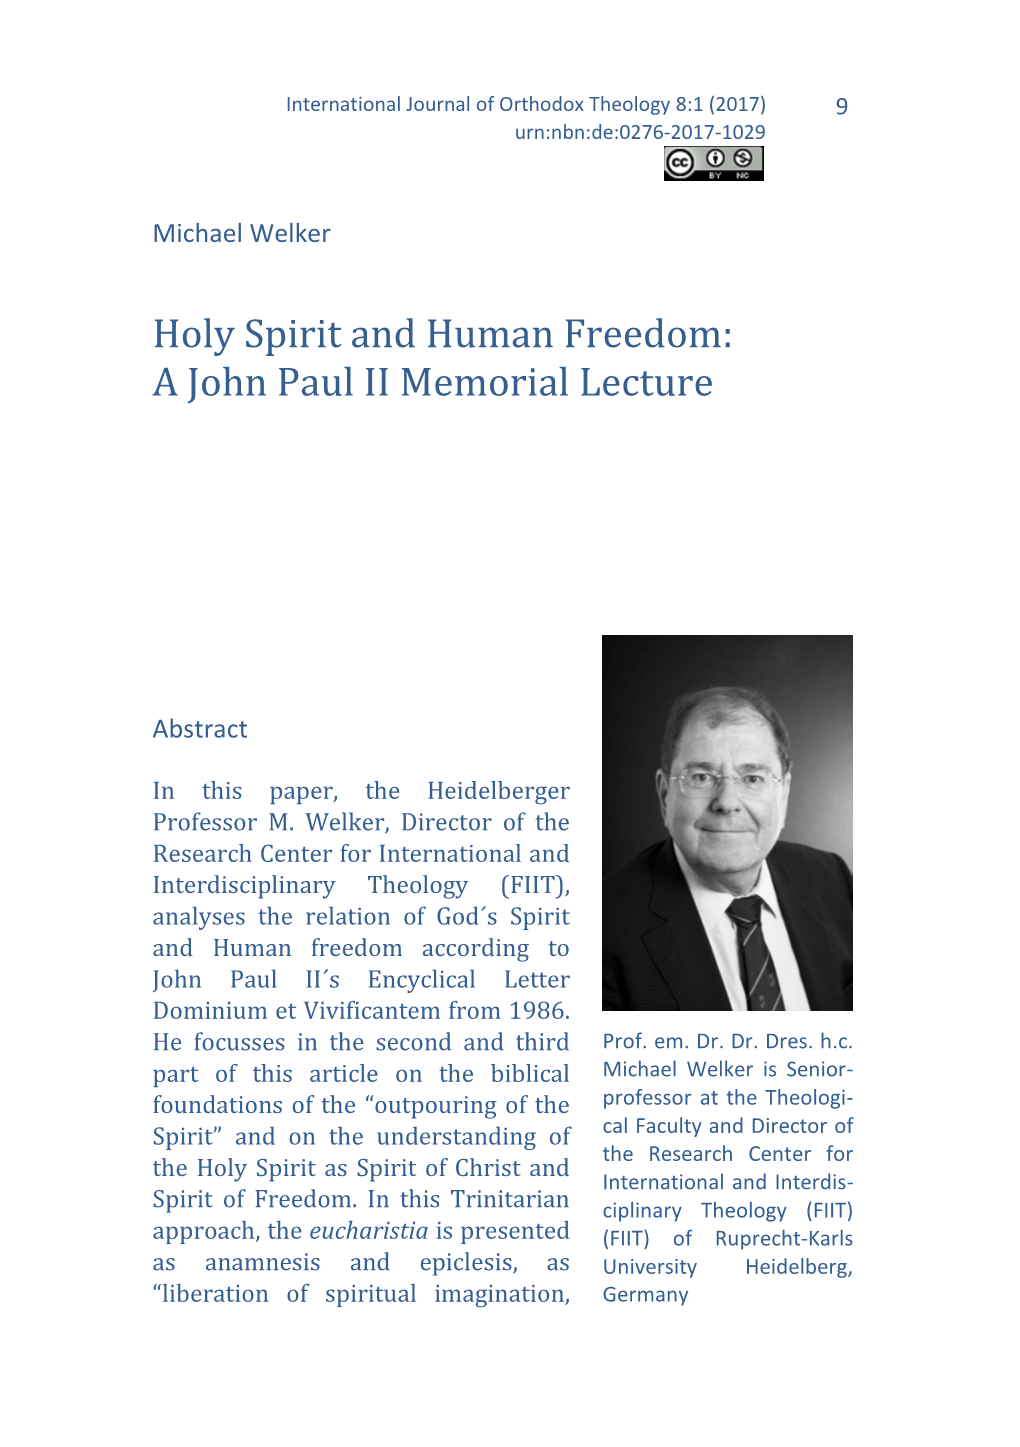 Holy Spirit and Human Freedom: a John Paul II Memorial Lecture